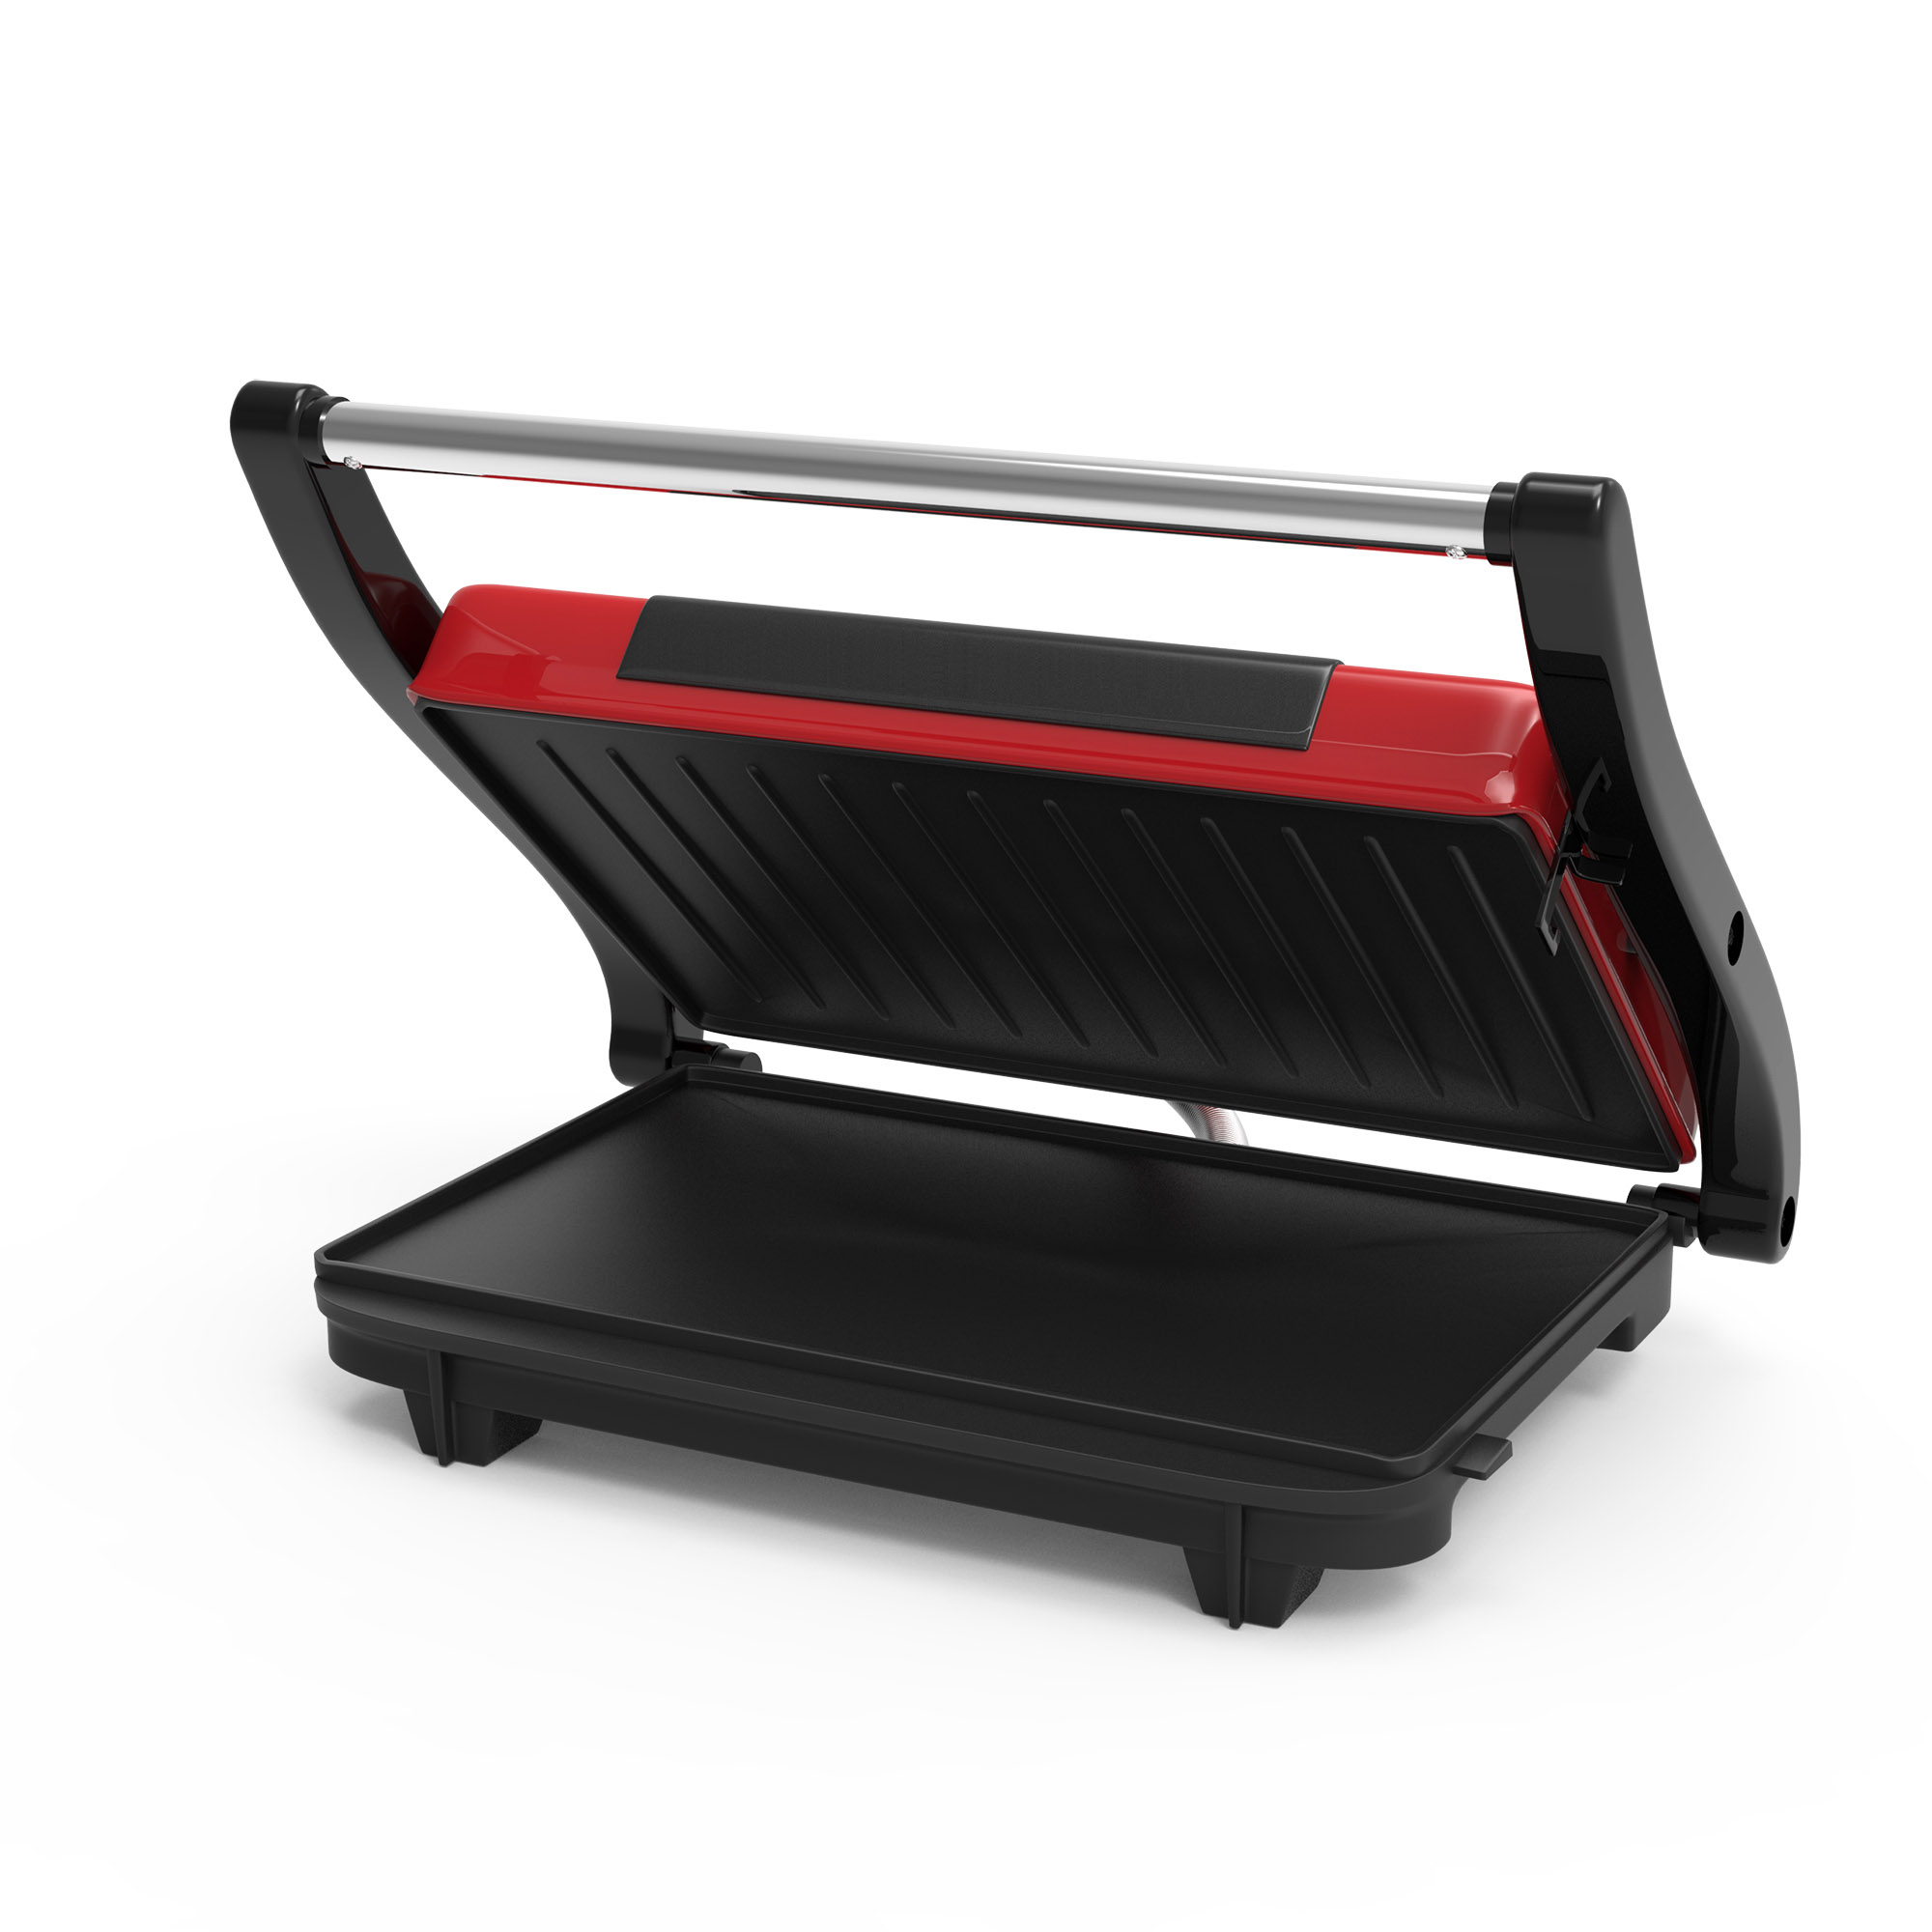 Chef Buddy Non-Stick Grill and Panini Press, Red - image 4 of 8